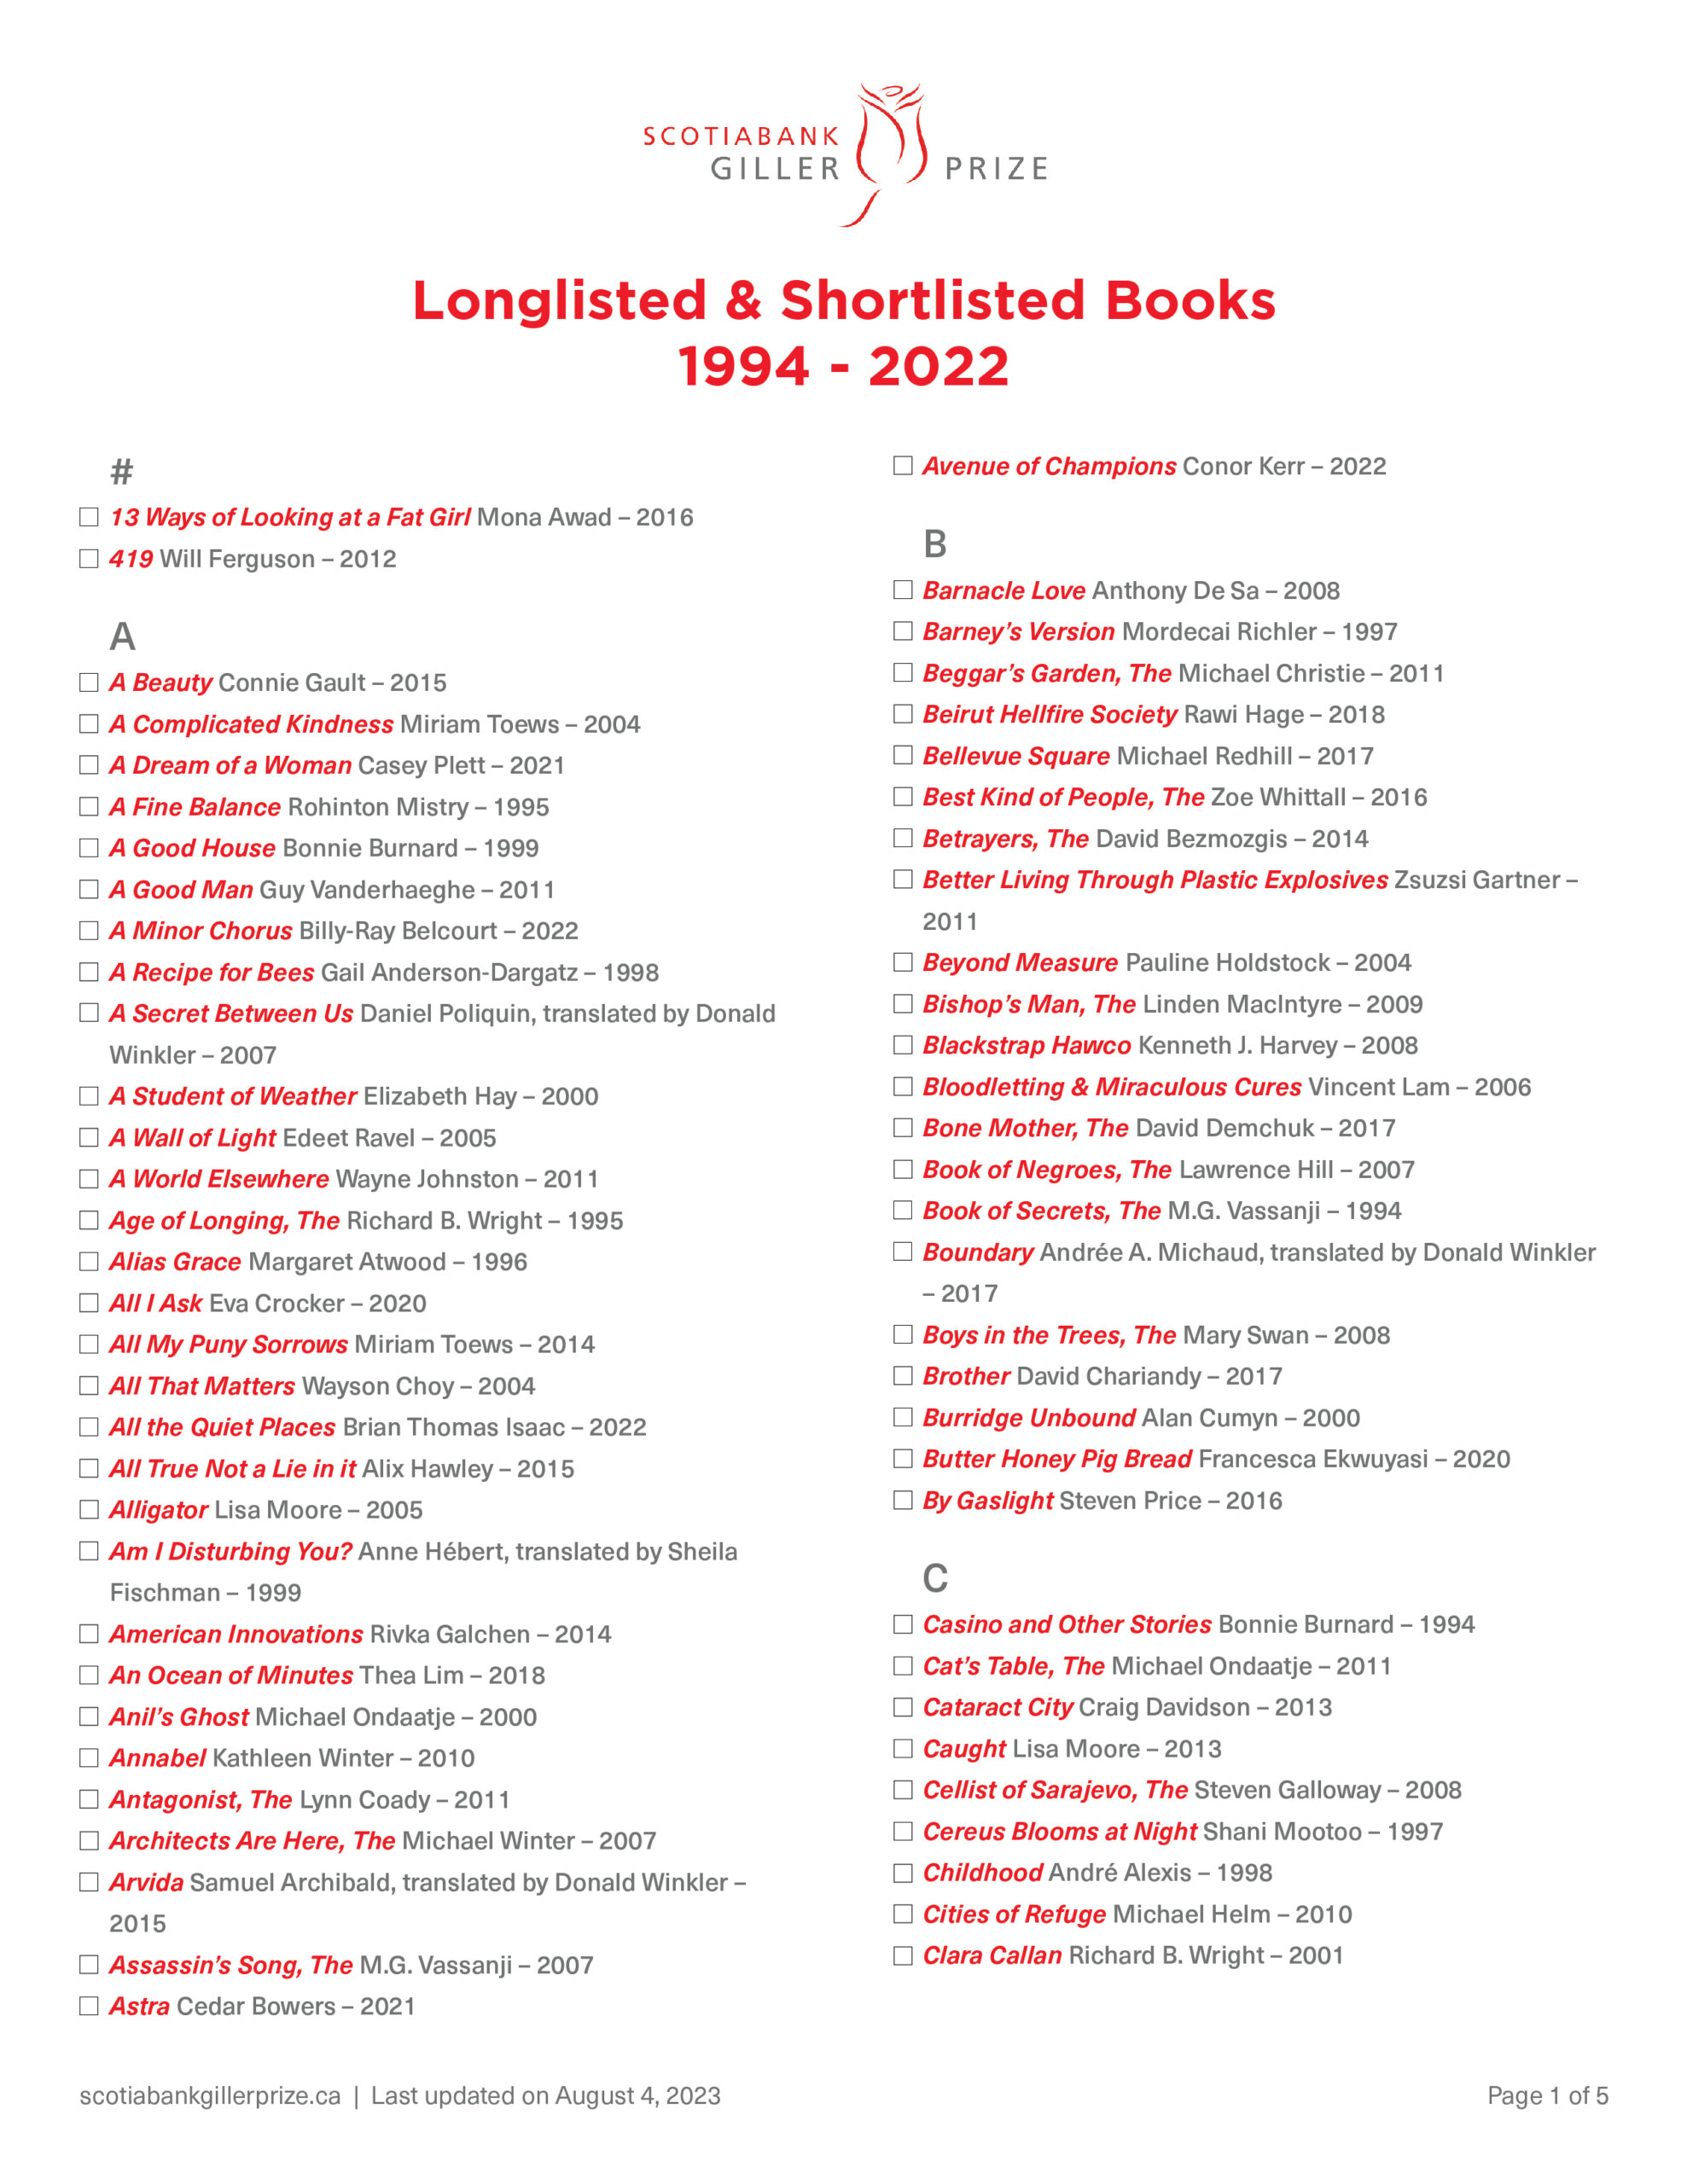 Scotiabank Giller Prize Nominated Books - August 4, 2023